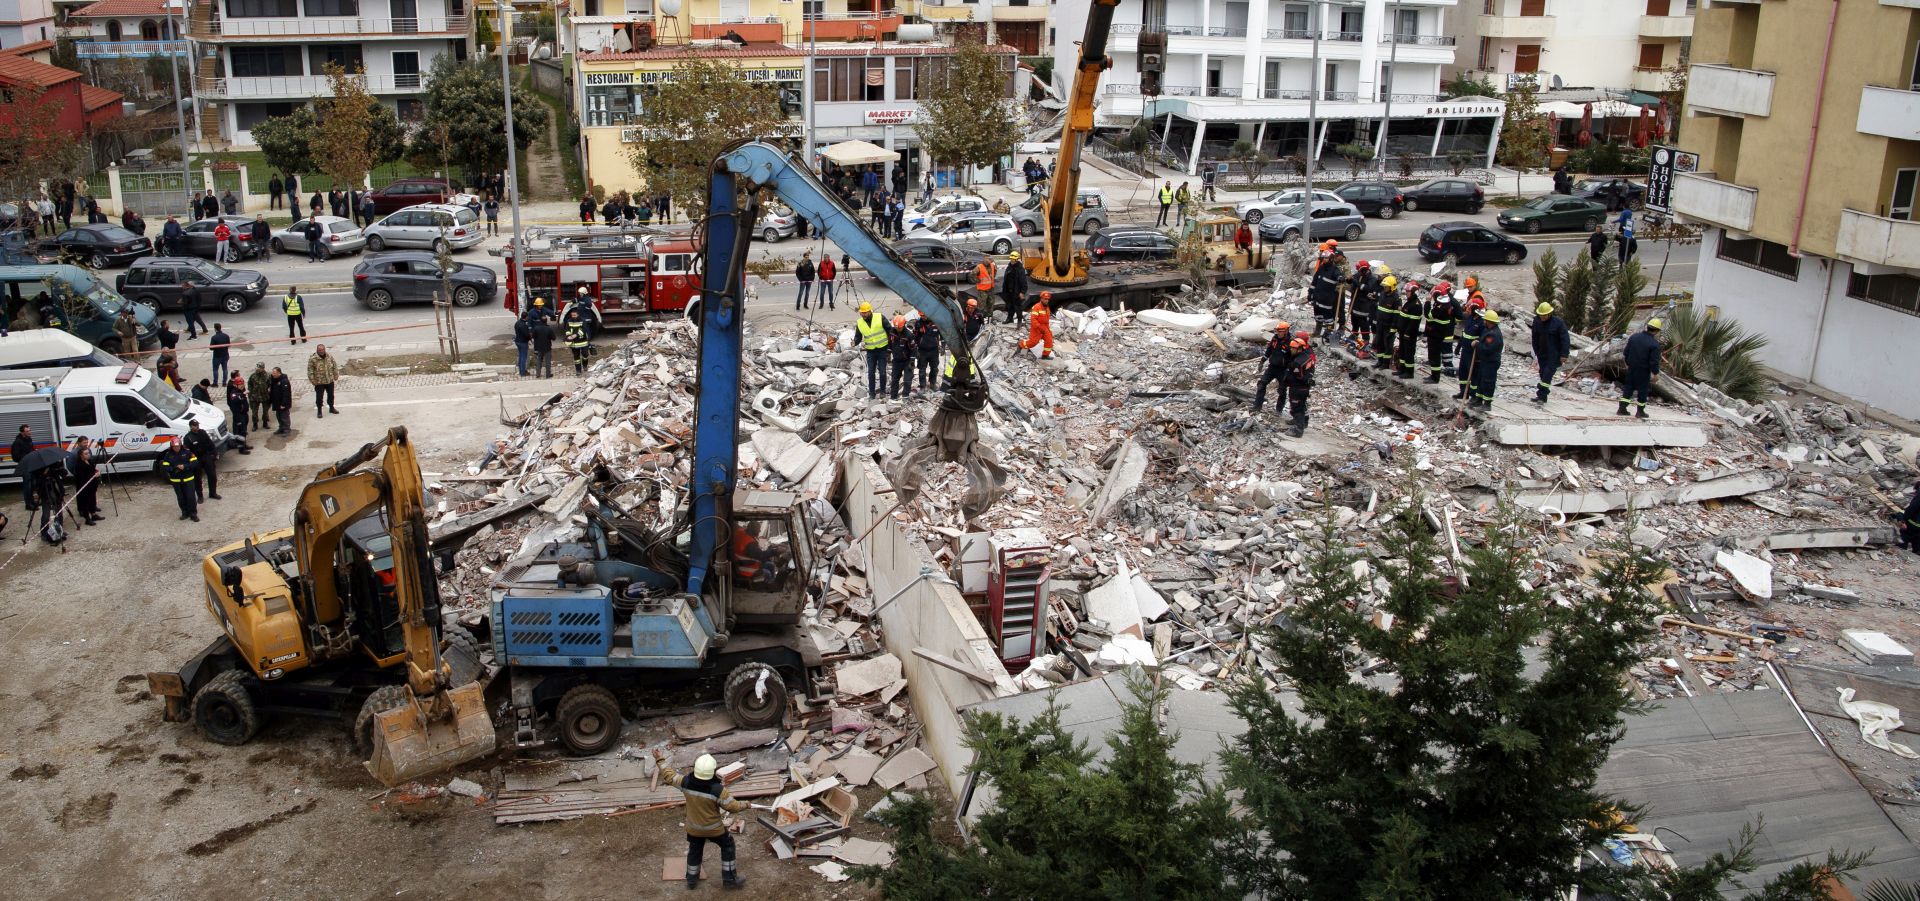 epa08030407 Search and rescue teams search for at least one person stuck in the rubble of a building after an earthquake hit Durres, Albania, 28 November 2019. Albania was hit by a 6.4 magnitude earthquake on 26 November 2019, leaving at least 41 people dead and dozens injured.  EPA/VALDRIN XHEMAJ